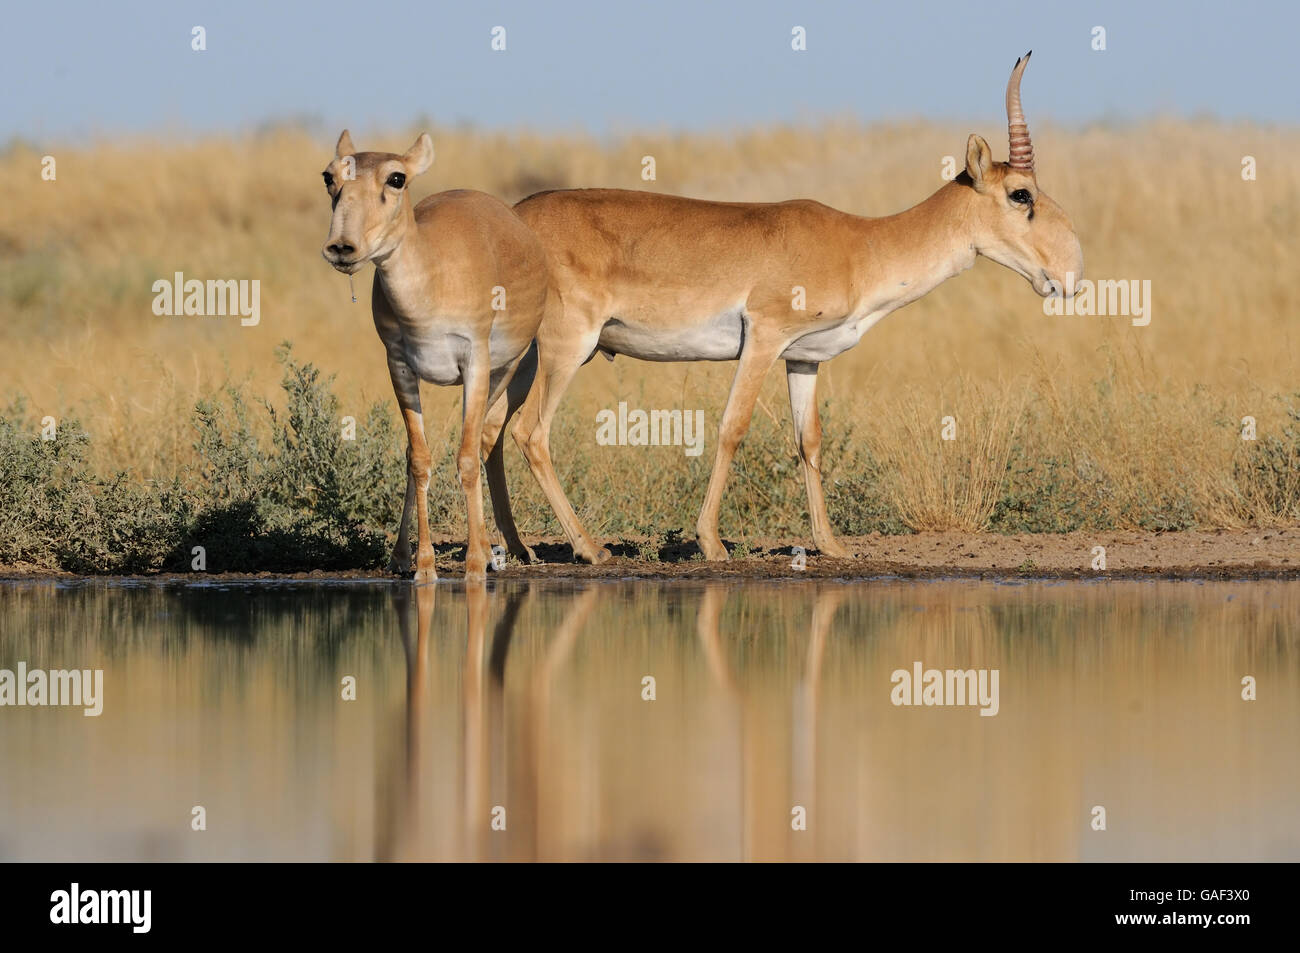 Critically endangered wild Saiga antelopes (Saiga tatarica, male and female) at watering in steppe. Stock Photo